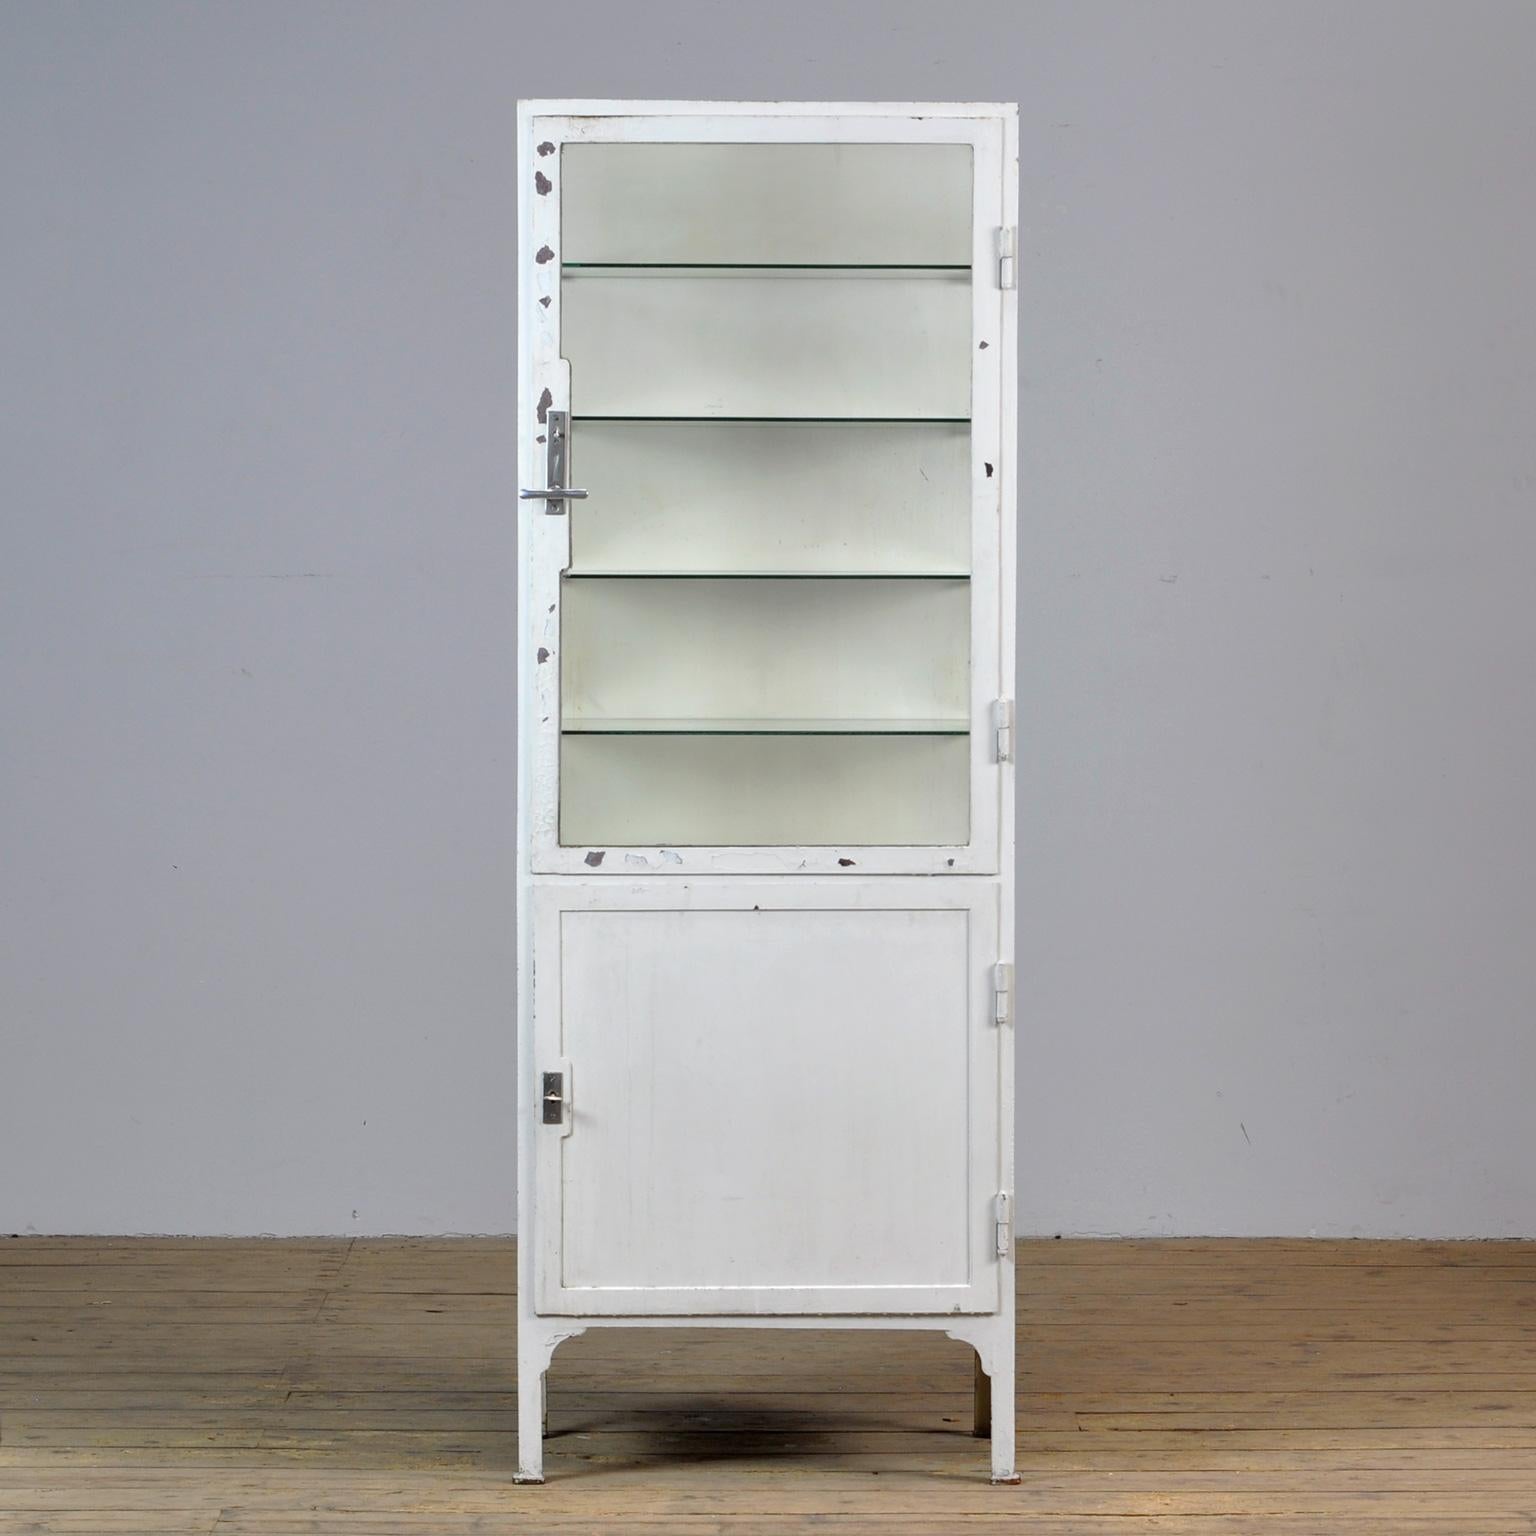 This former medicine cabinet was produced in the 1940s in Hungary and is made from thick iron and glass. With a very nice lock and handle on the top door. It features four new glass shelves.